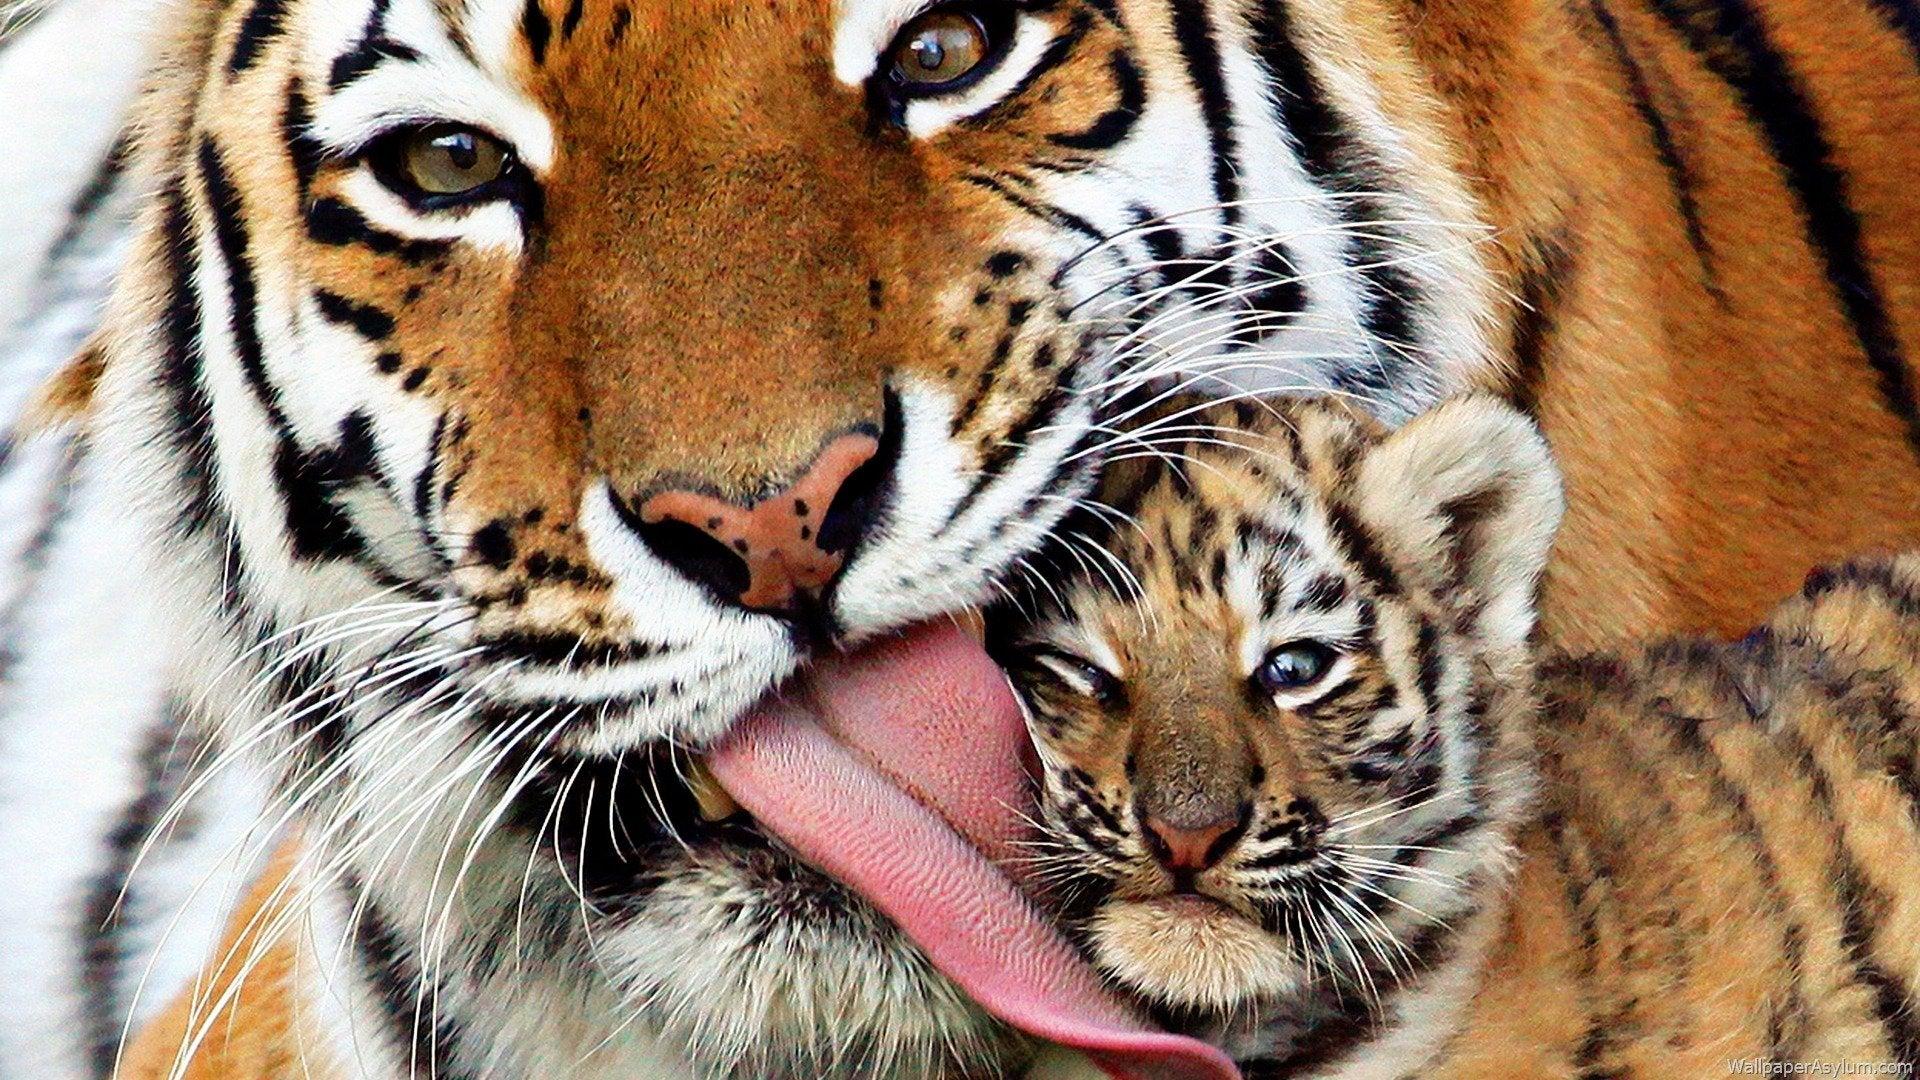 Tiger Mother Licking Her Cub. There are only 000 Tigers